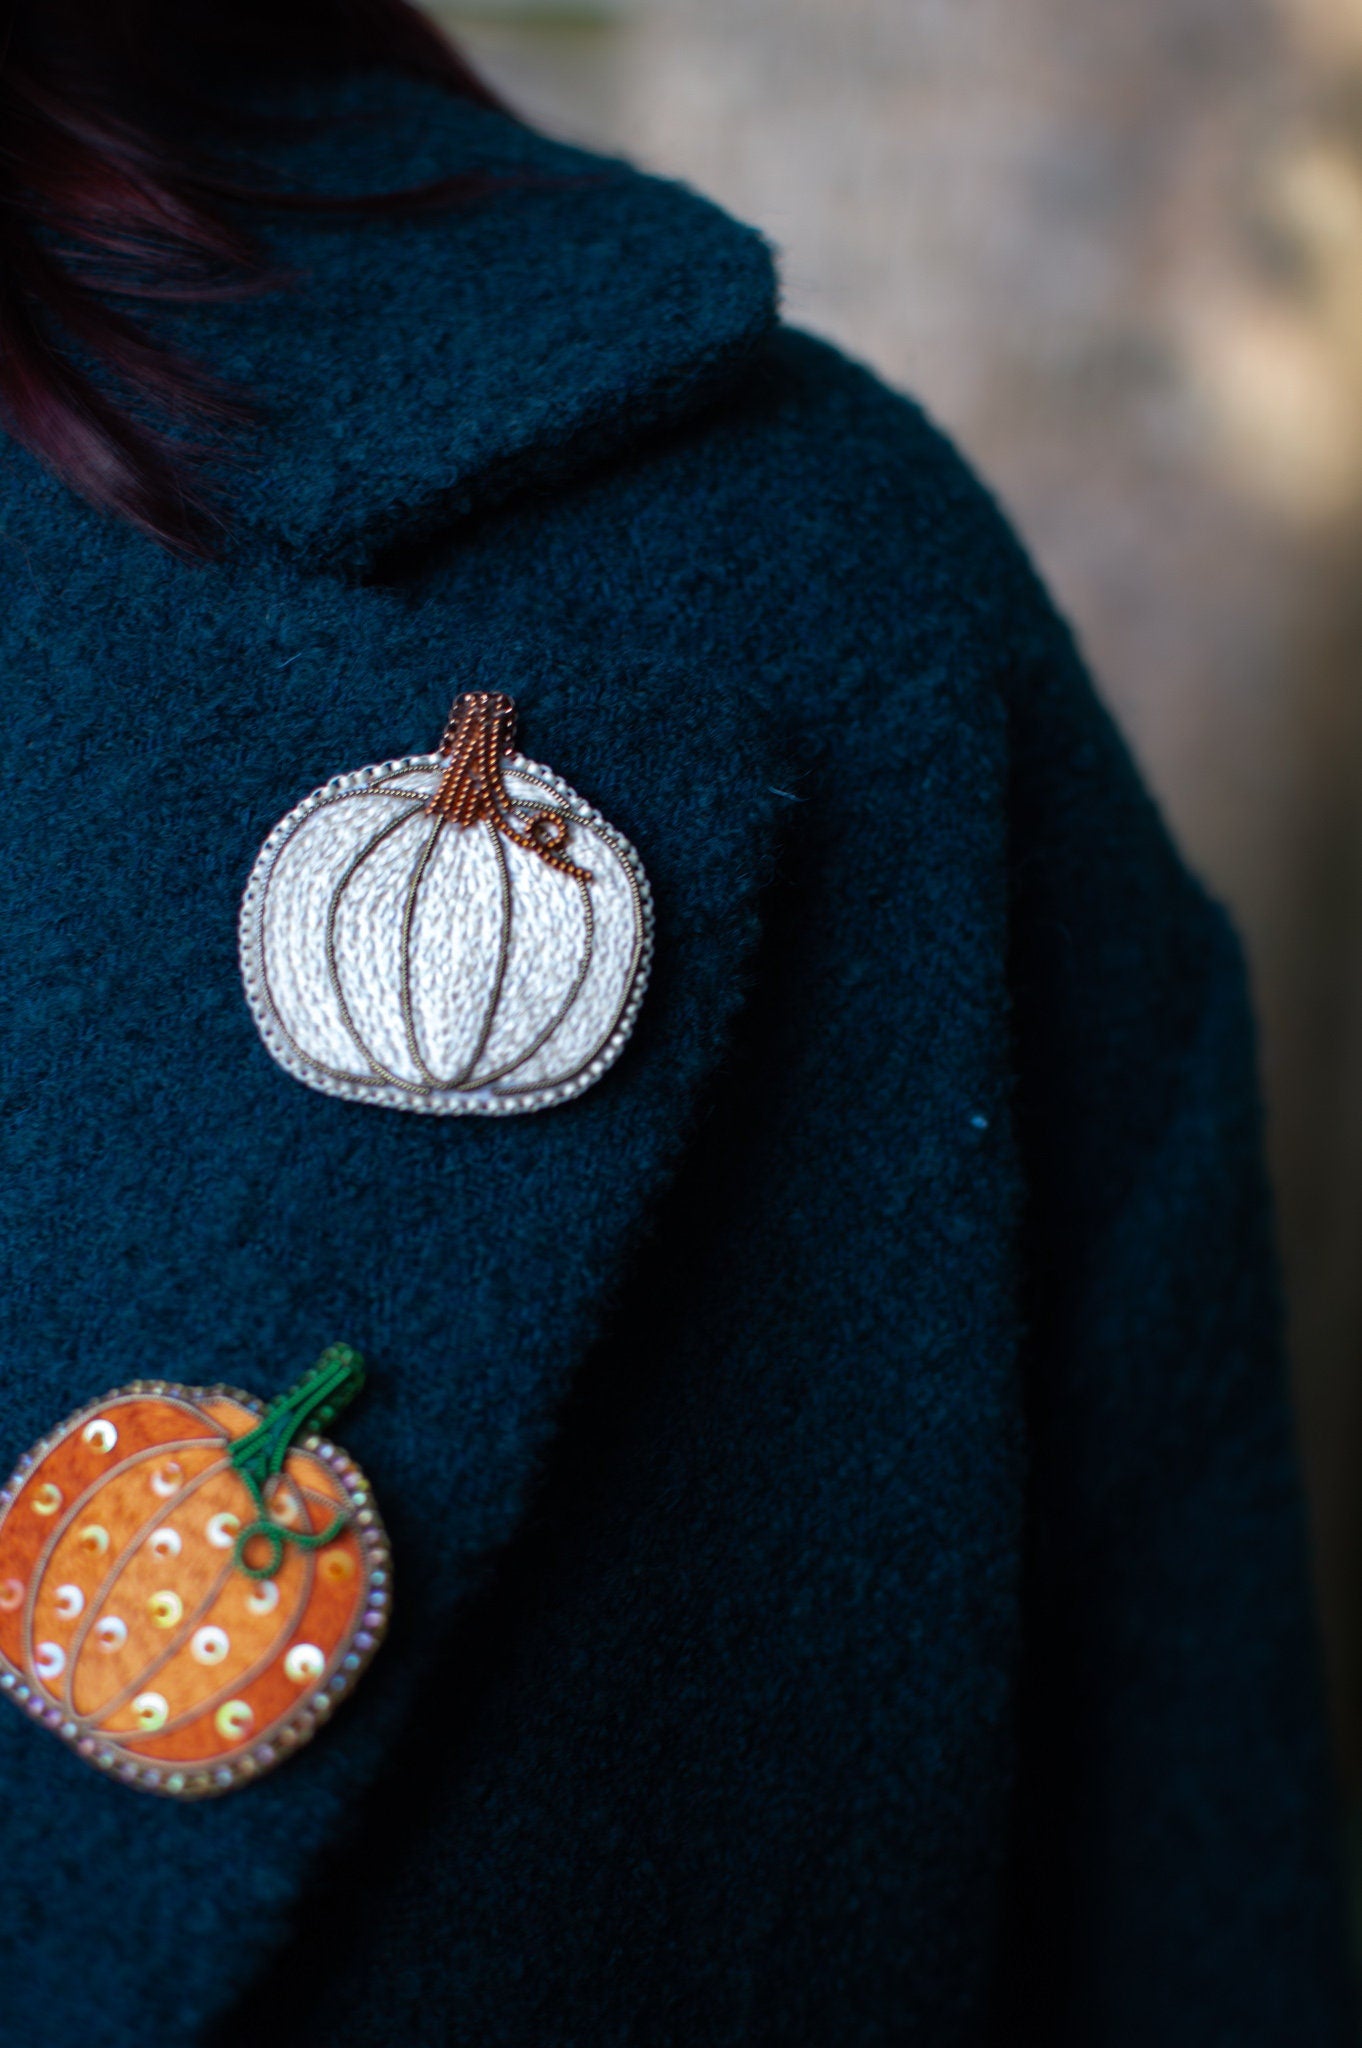 White and orange pumpkin embroidered brooches on a coat lapel